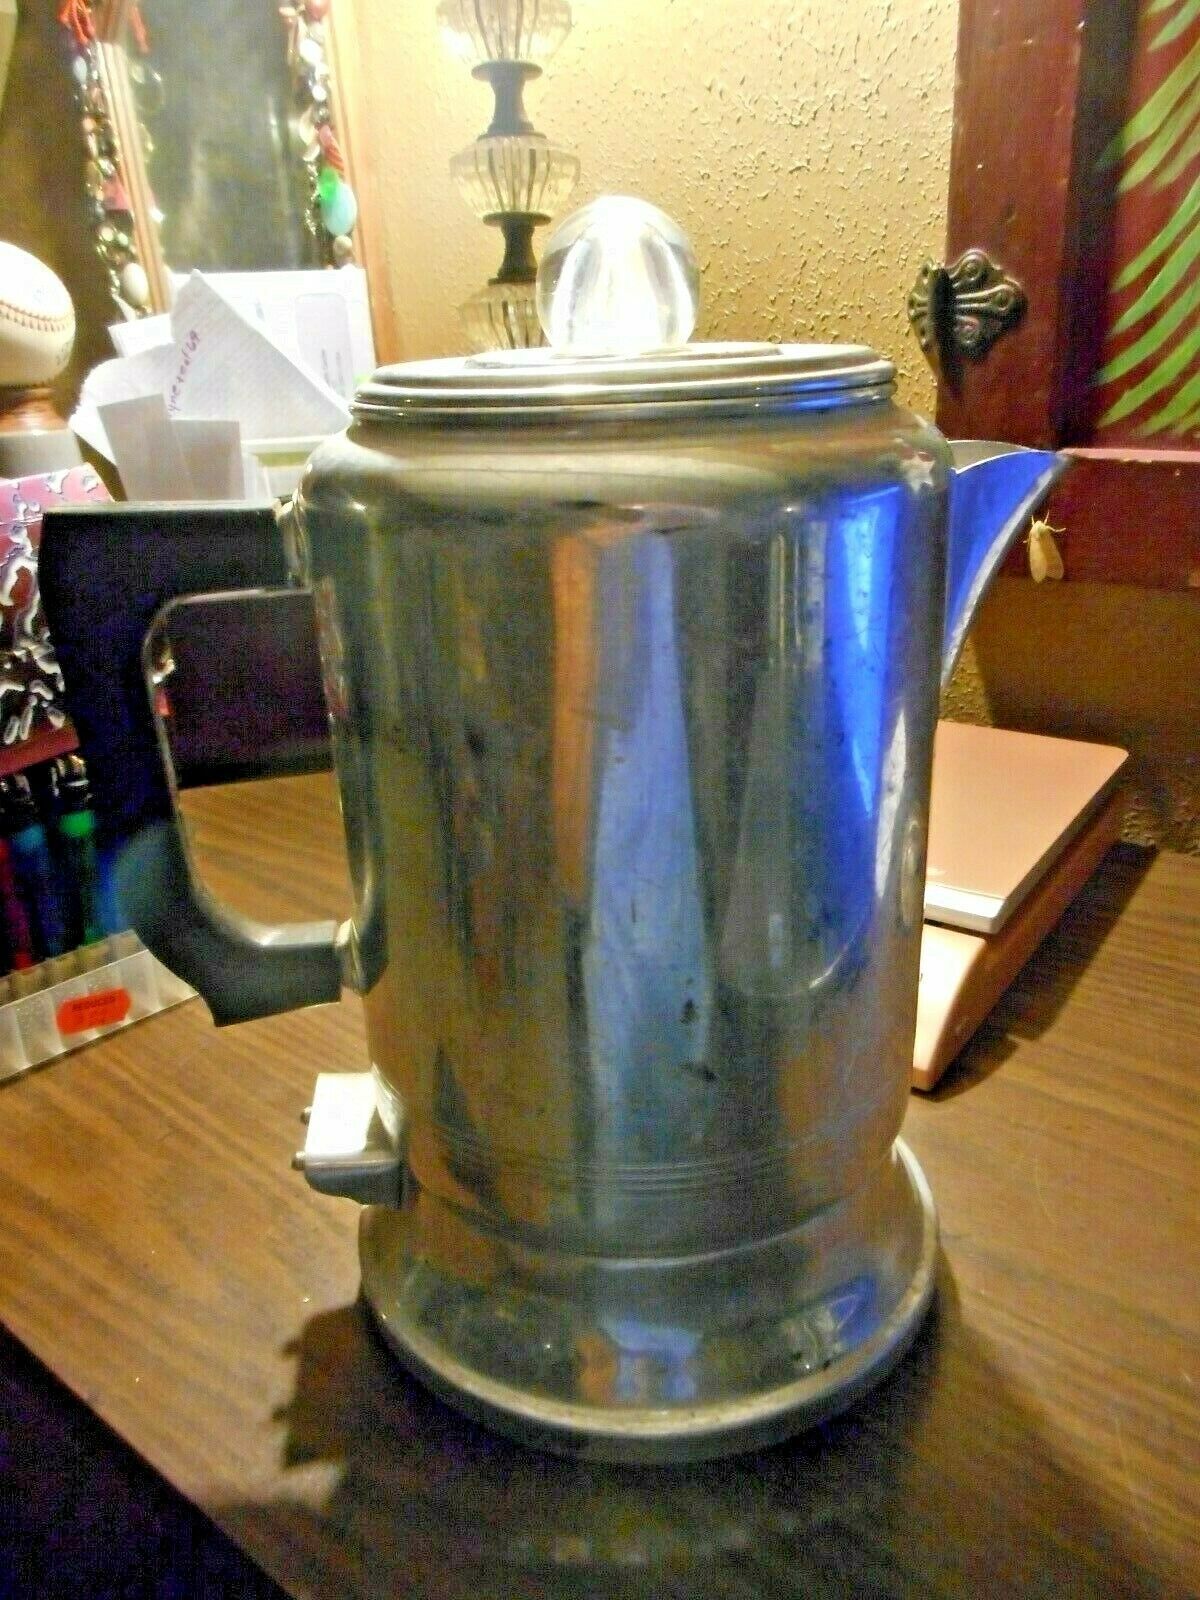 Vintage Comet Stove Top Percolator 7 cup Coffee Maker Pot Made in U.S.A. 7